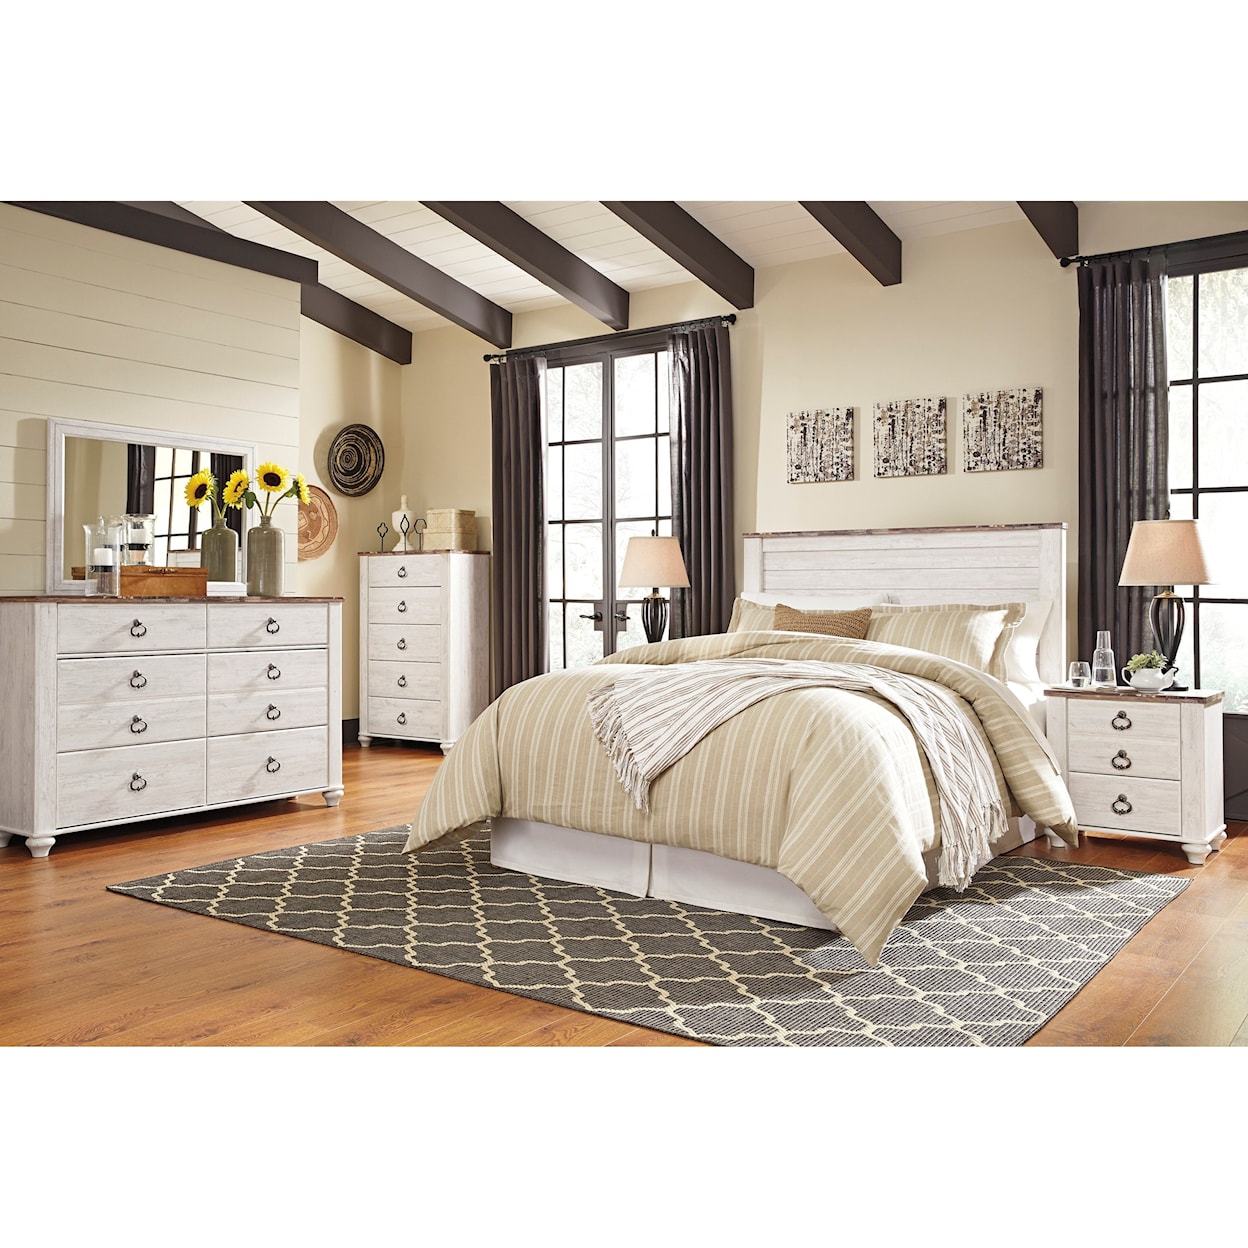 Signature Design by Ashley Willowton 5PC Queen/Full Bedroom Group